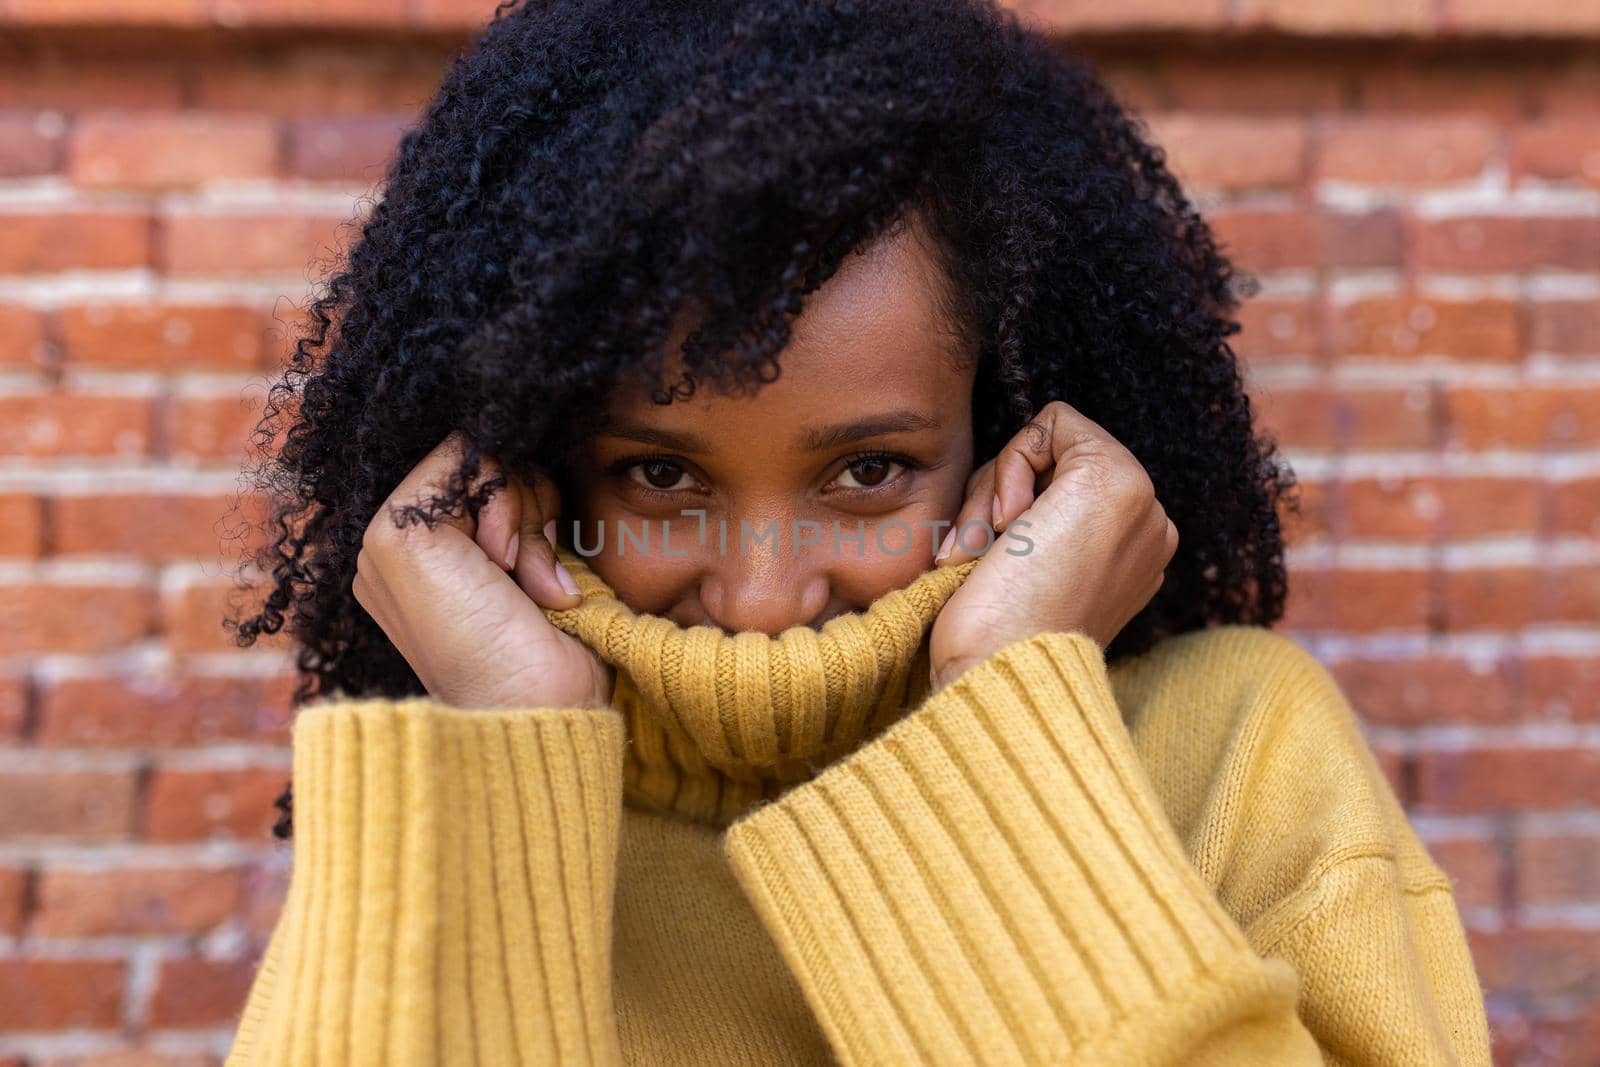 Portrait of young African American woman looking at camera covers her face with the collar of her sweater. Brick wall background. Lifestyle concept.